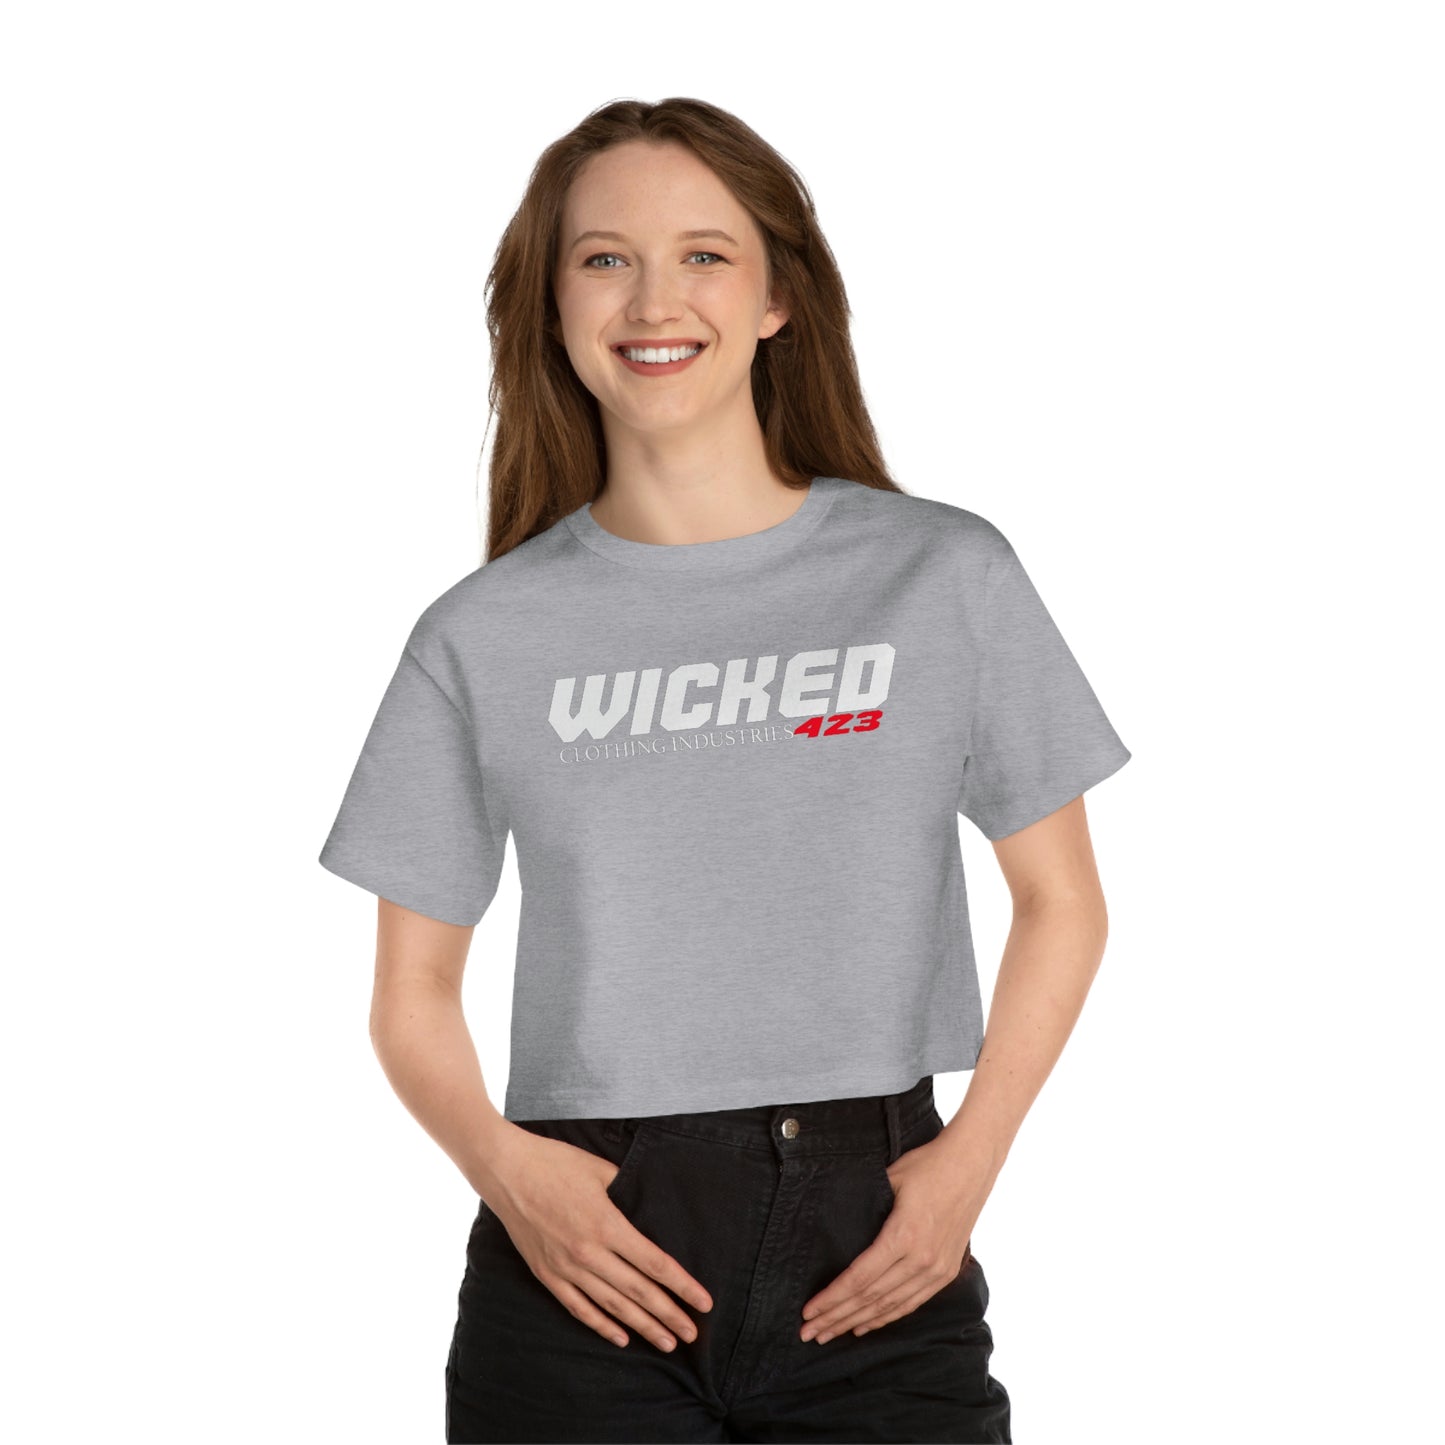 Wicked 423/ Cropped T-Shirt